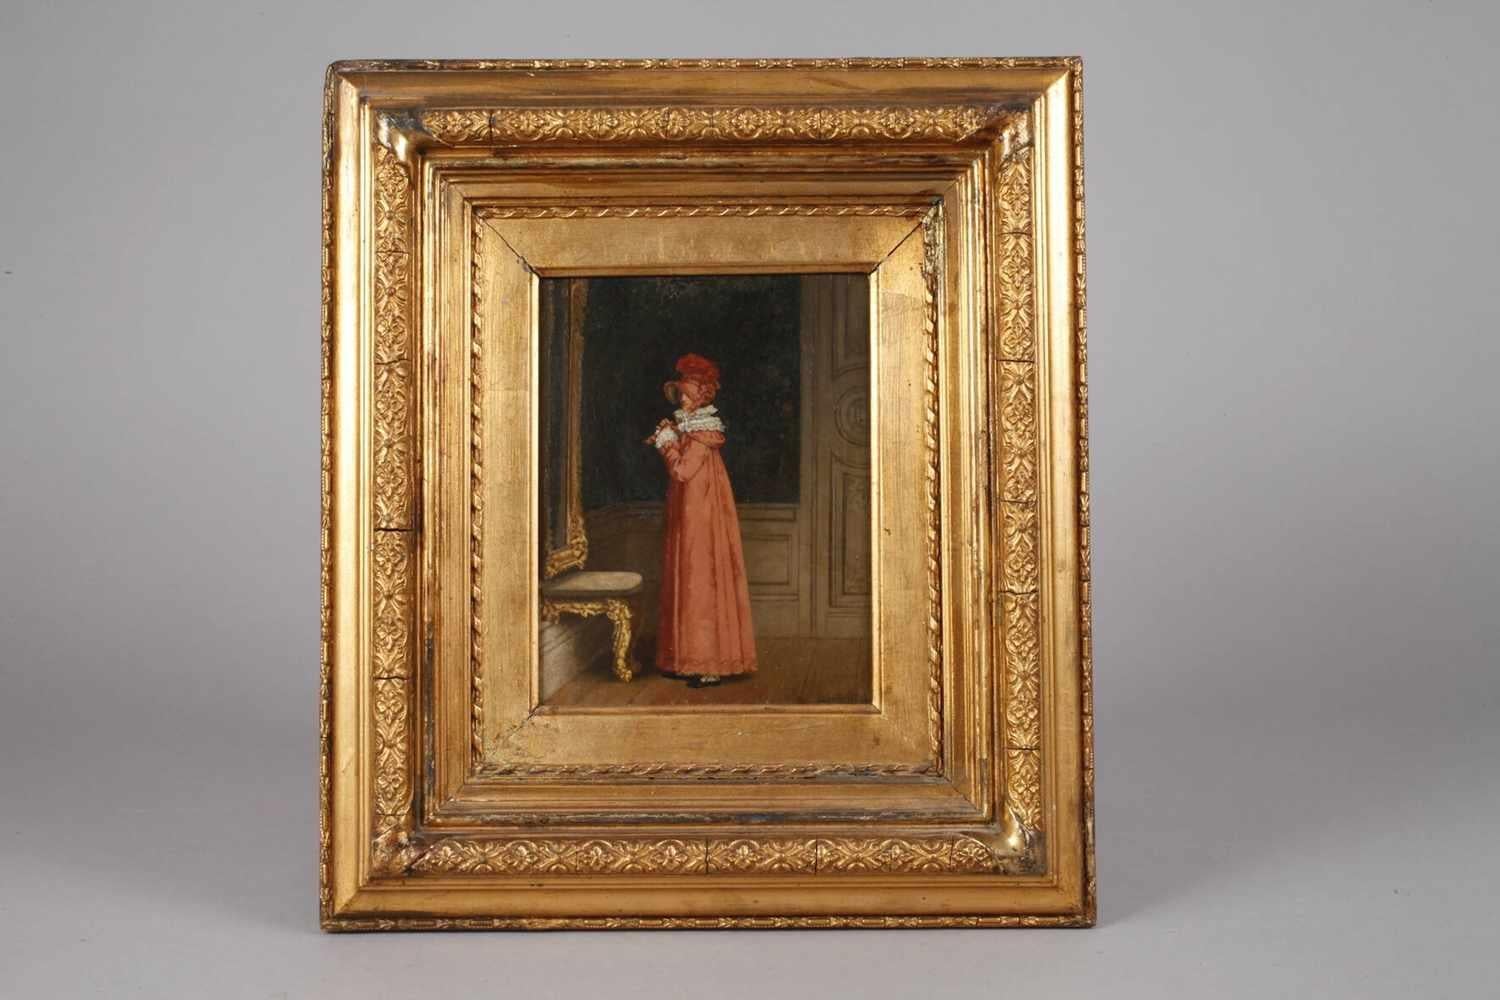 The Mirror
by Paul Preyer (German 1847-1931)
signed lower right corner
oil on board, framed
painting: 8 x 6 inches
framed: 14.5 x 13 inches
provenance: private collection, Germany

Delightful 19th century oil painting by the well listed German